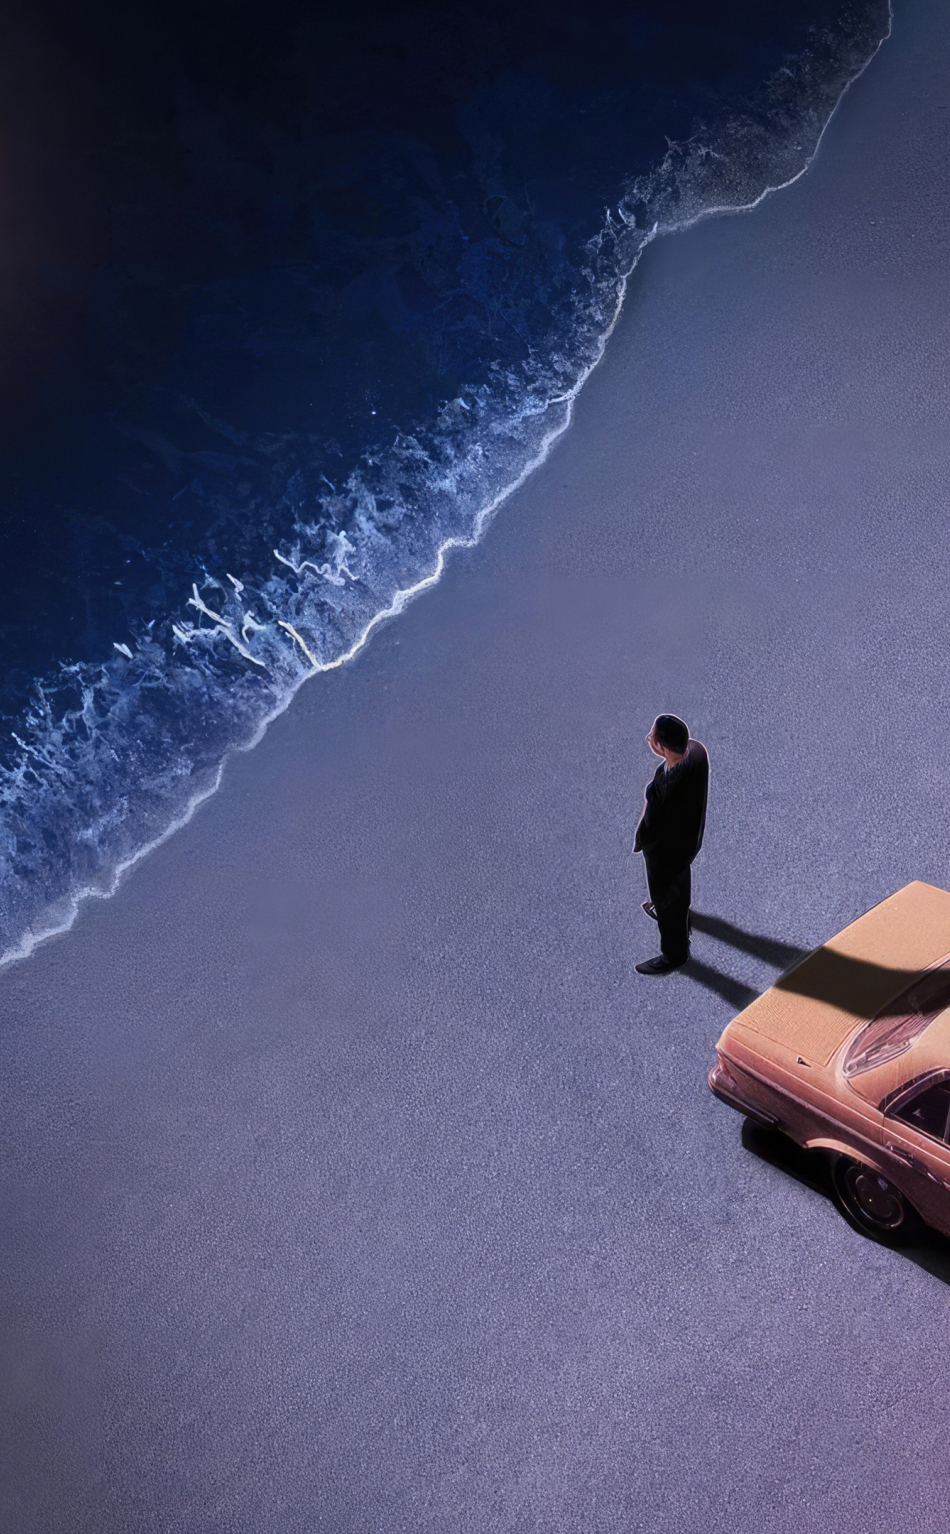 Lonely at night at the beach, car and man, art , 950x1534 wallpaper